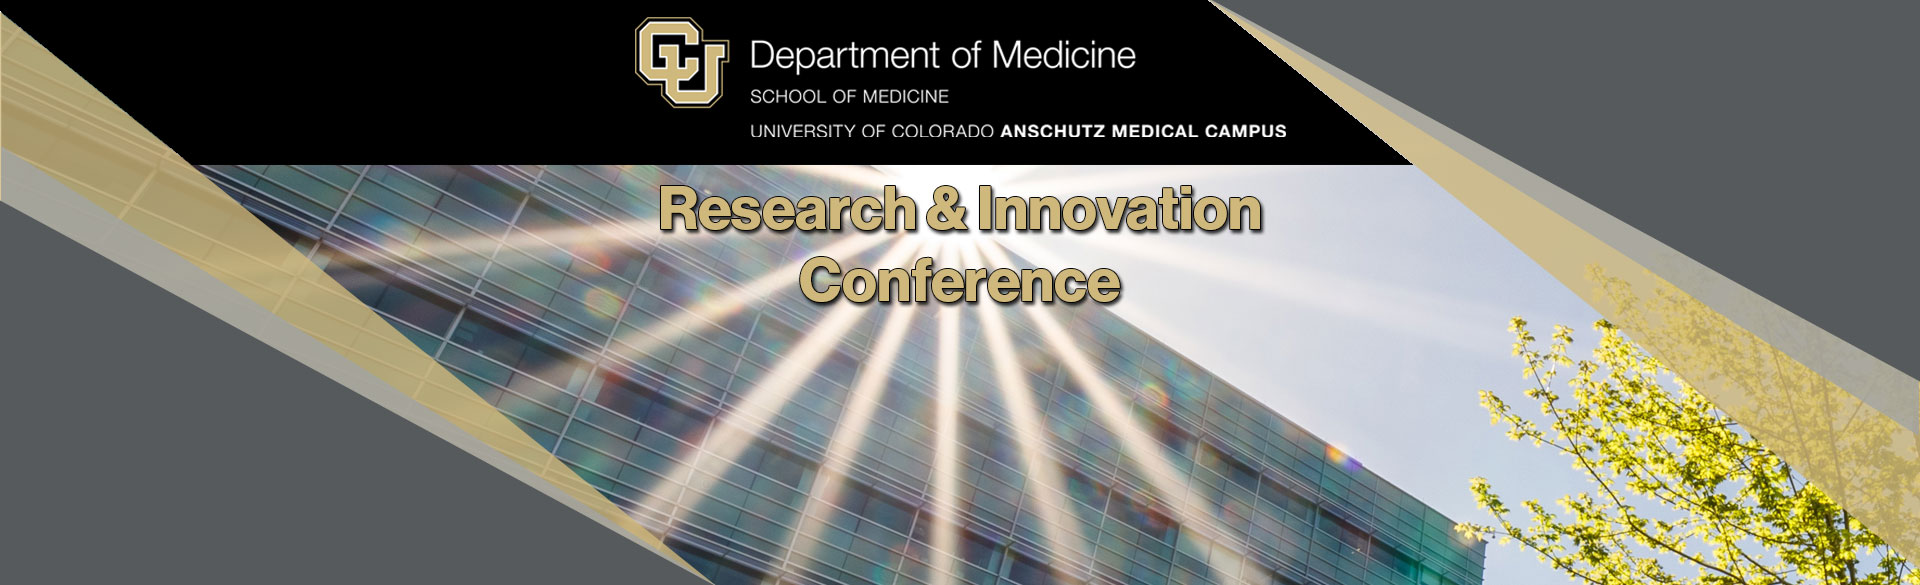 Research & Innovation Conference